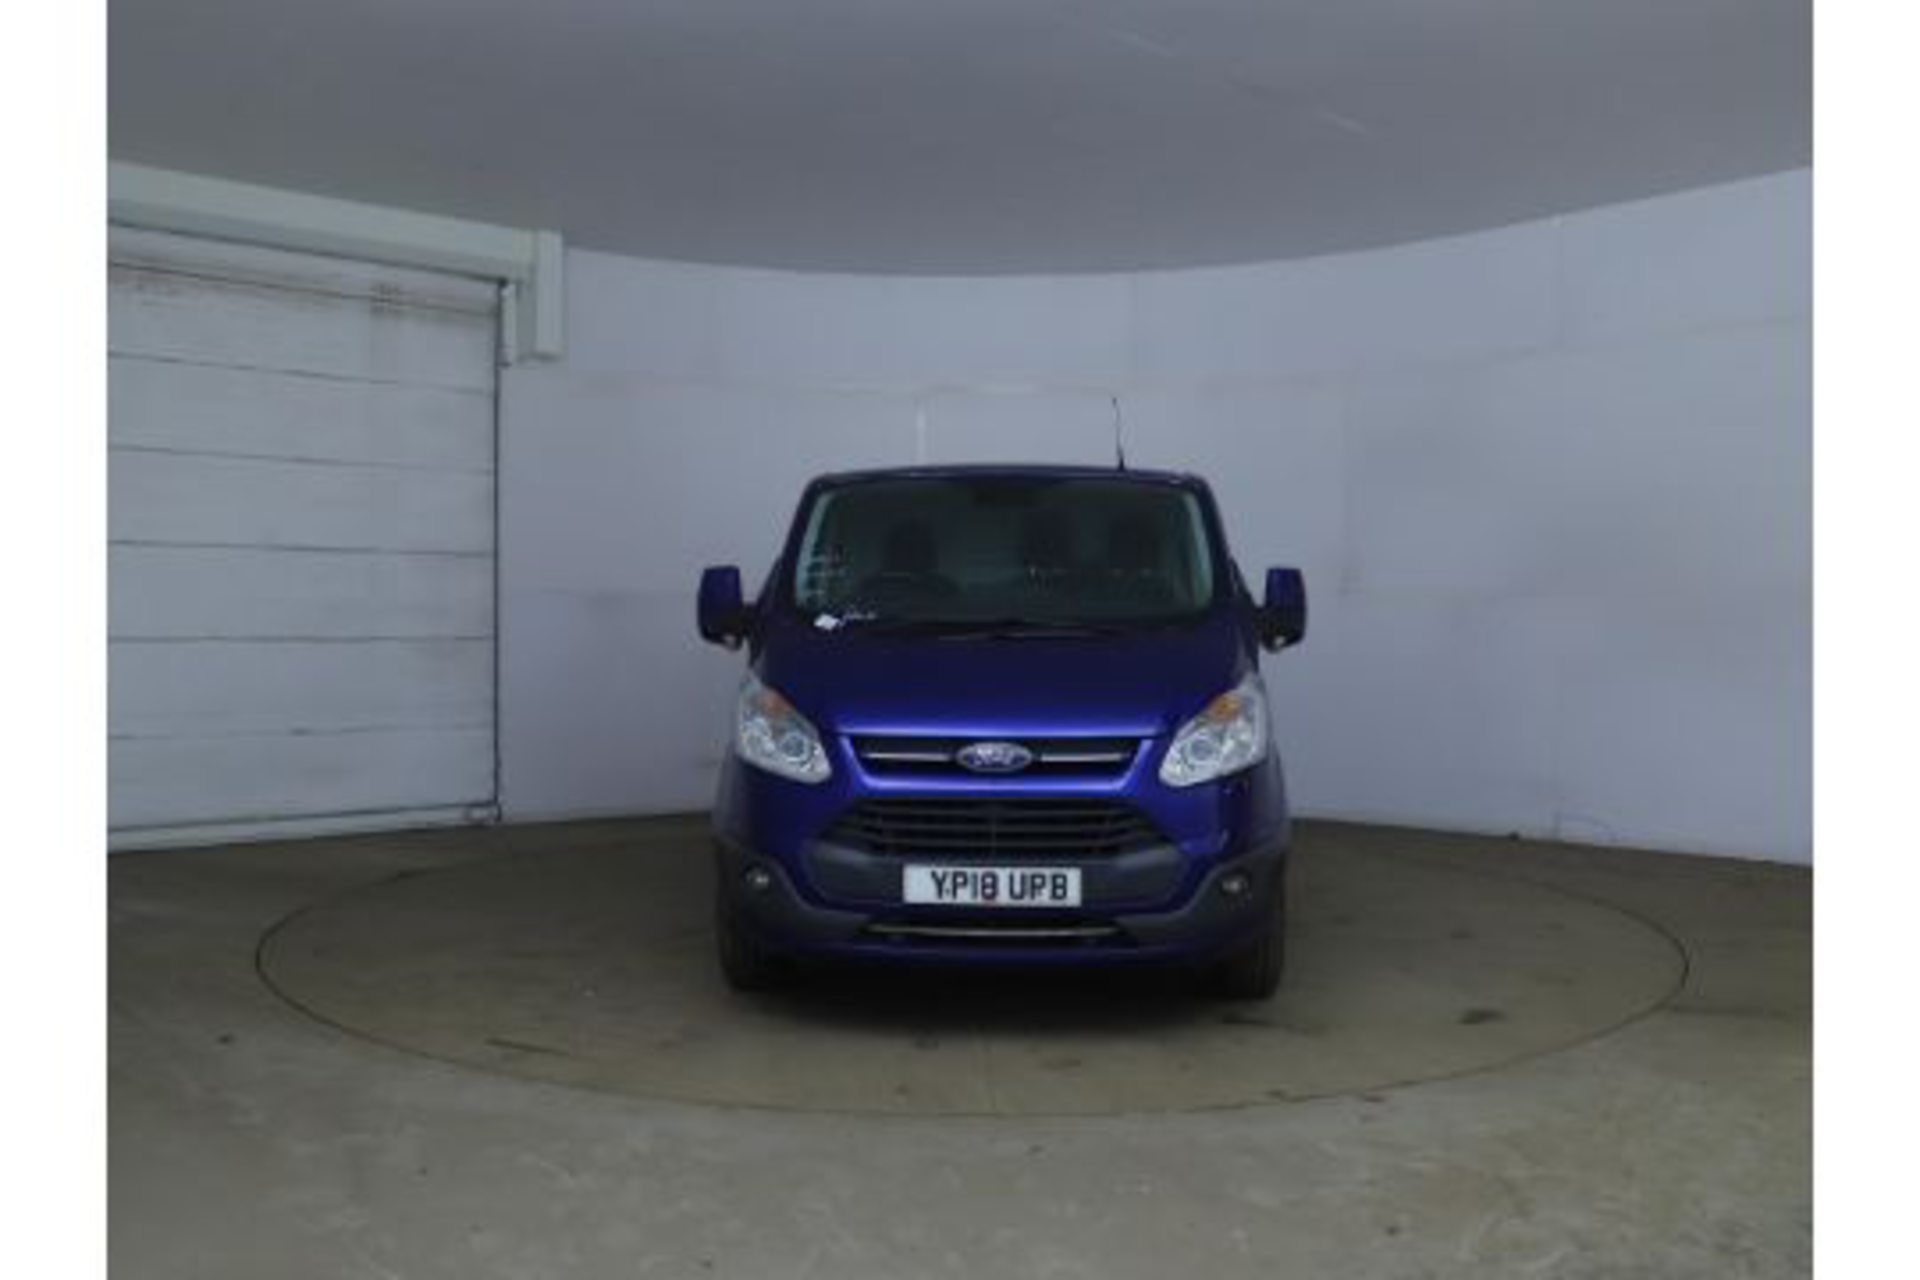 Reserve Met - Ford Transit Custom "Limited" 2.0Tdci (130) Swb - 18 Reg Air Con Alloys - Euro 6 - Image 2 of 11